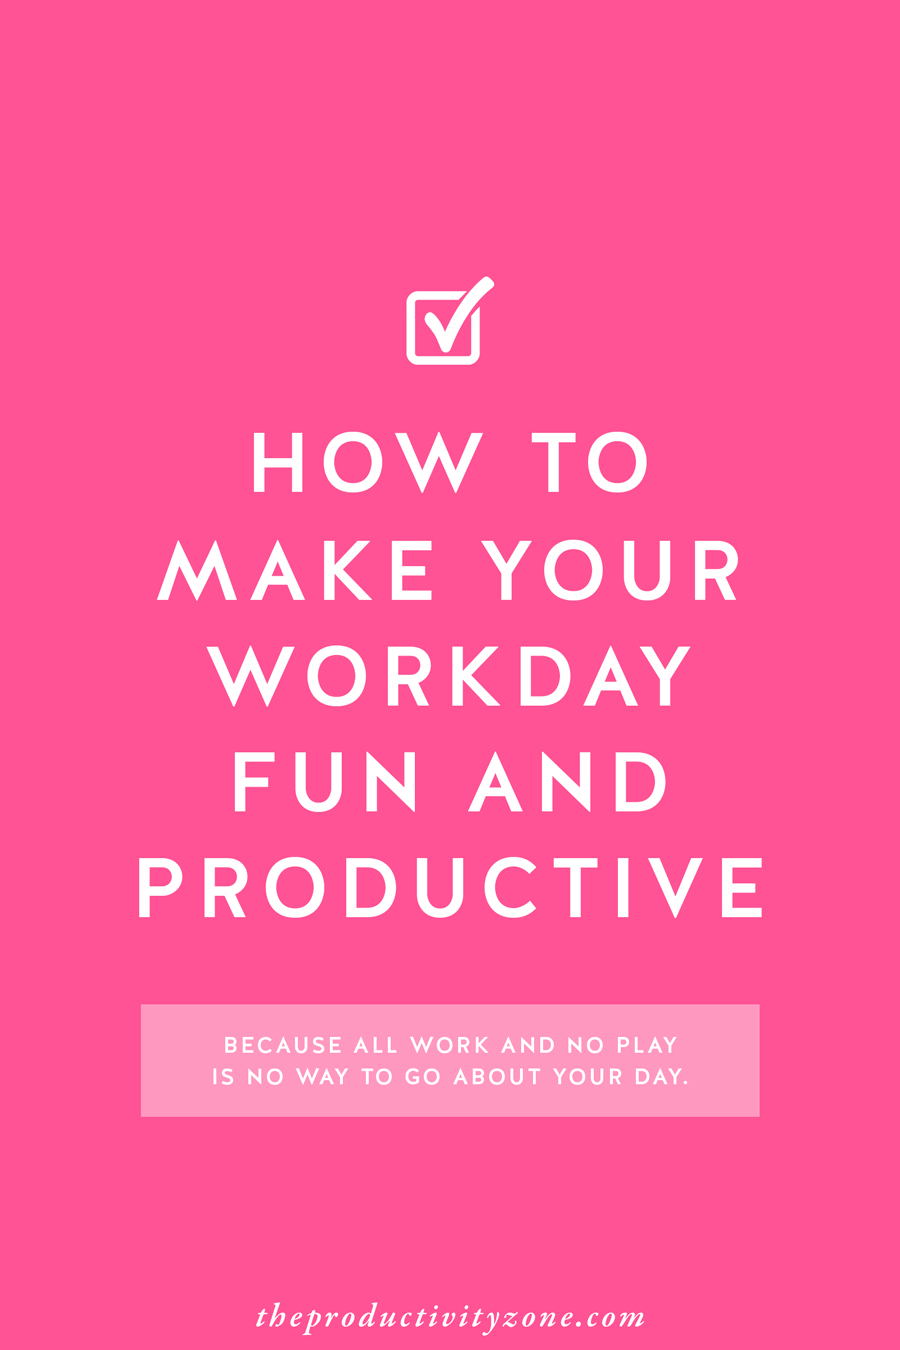 All work and no play is no way to go about your day… Check out 10 super simple ways to make your workday fun and productive on The Productivity Zone!!